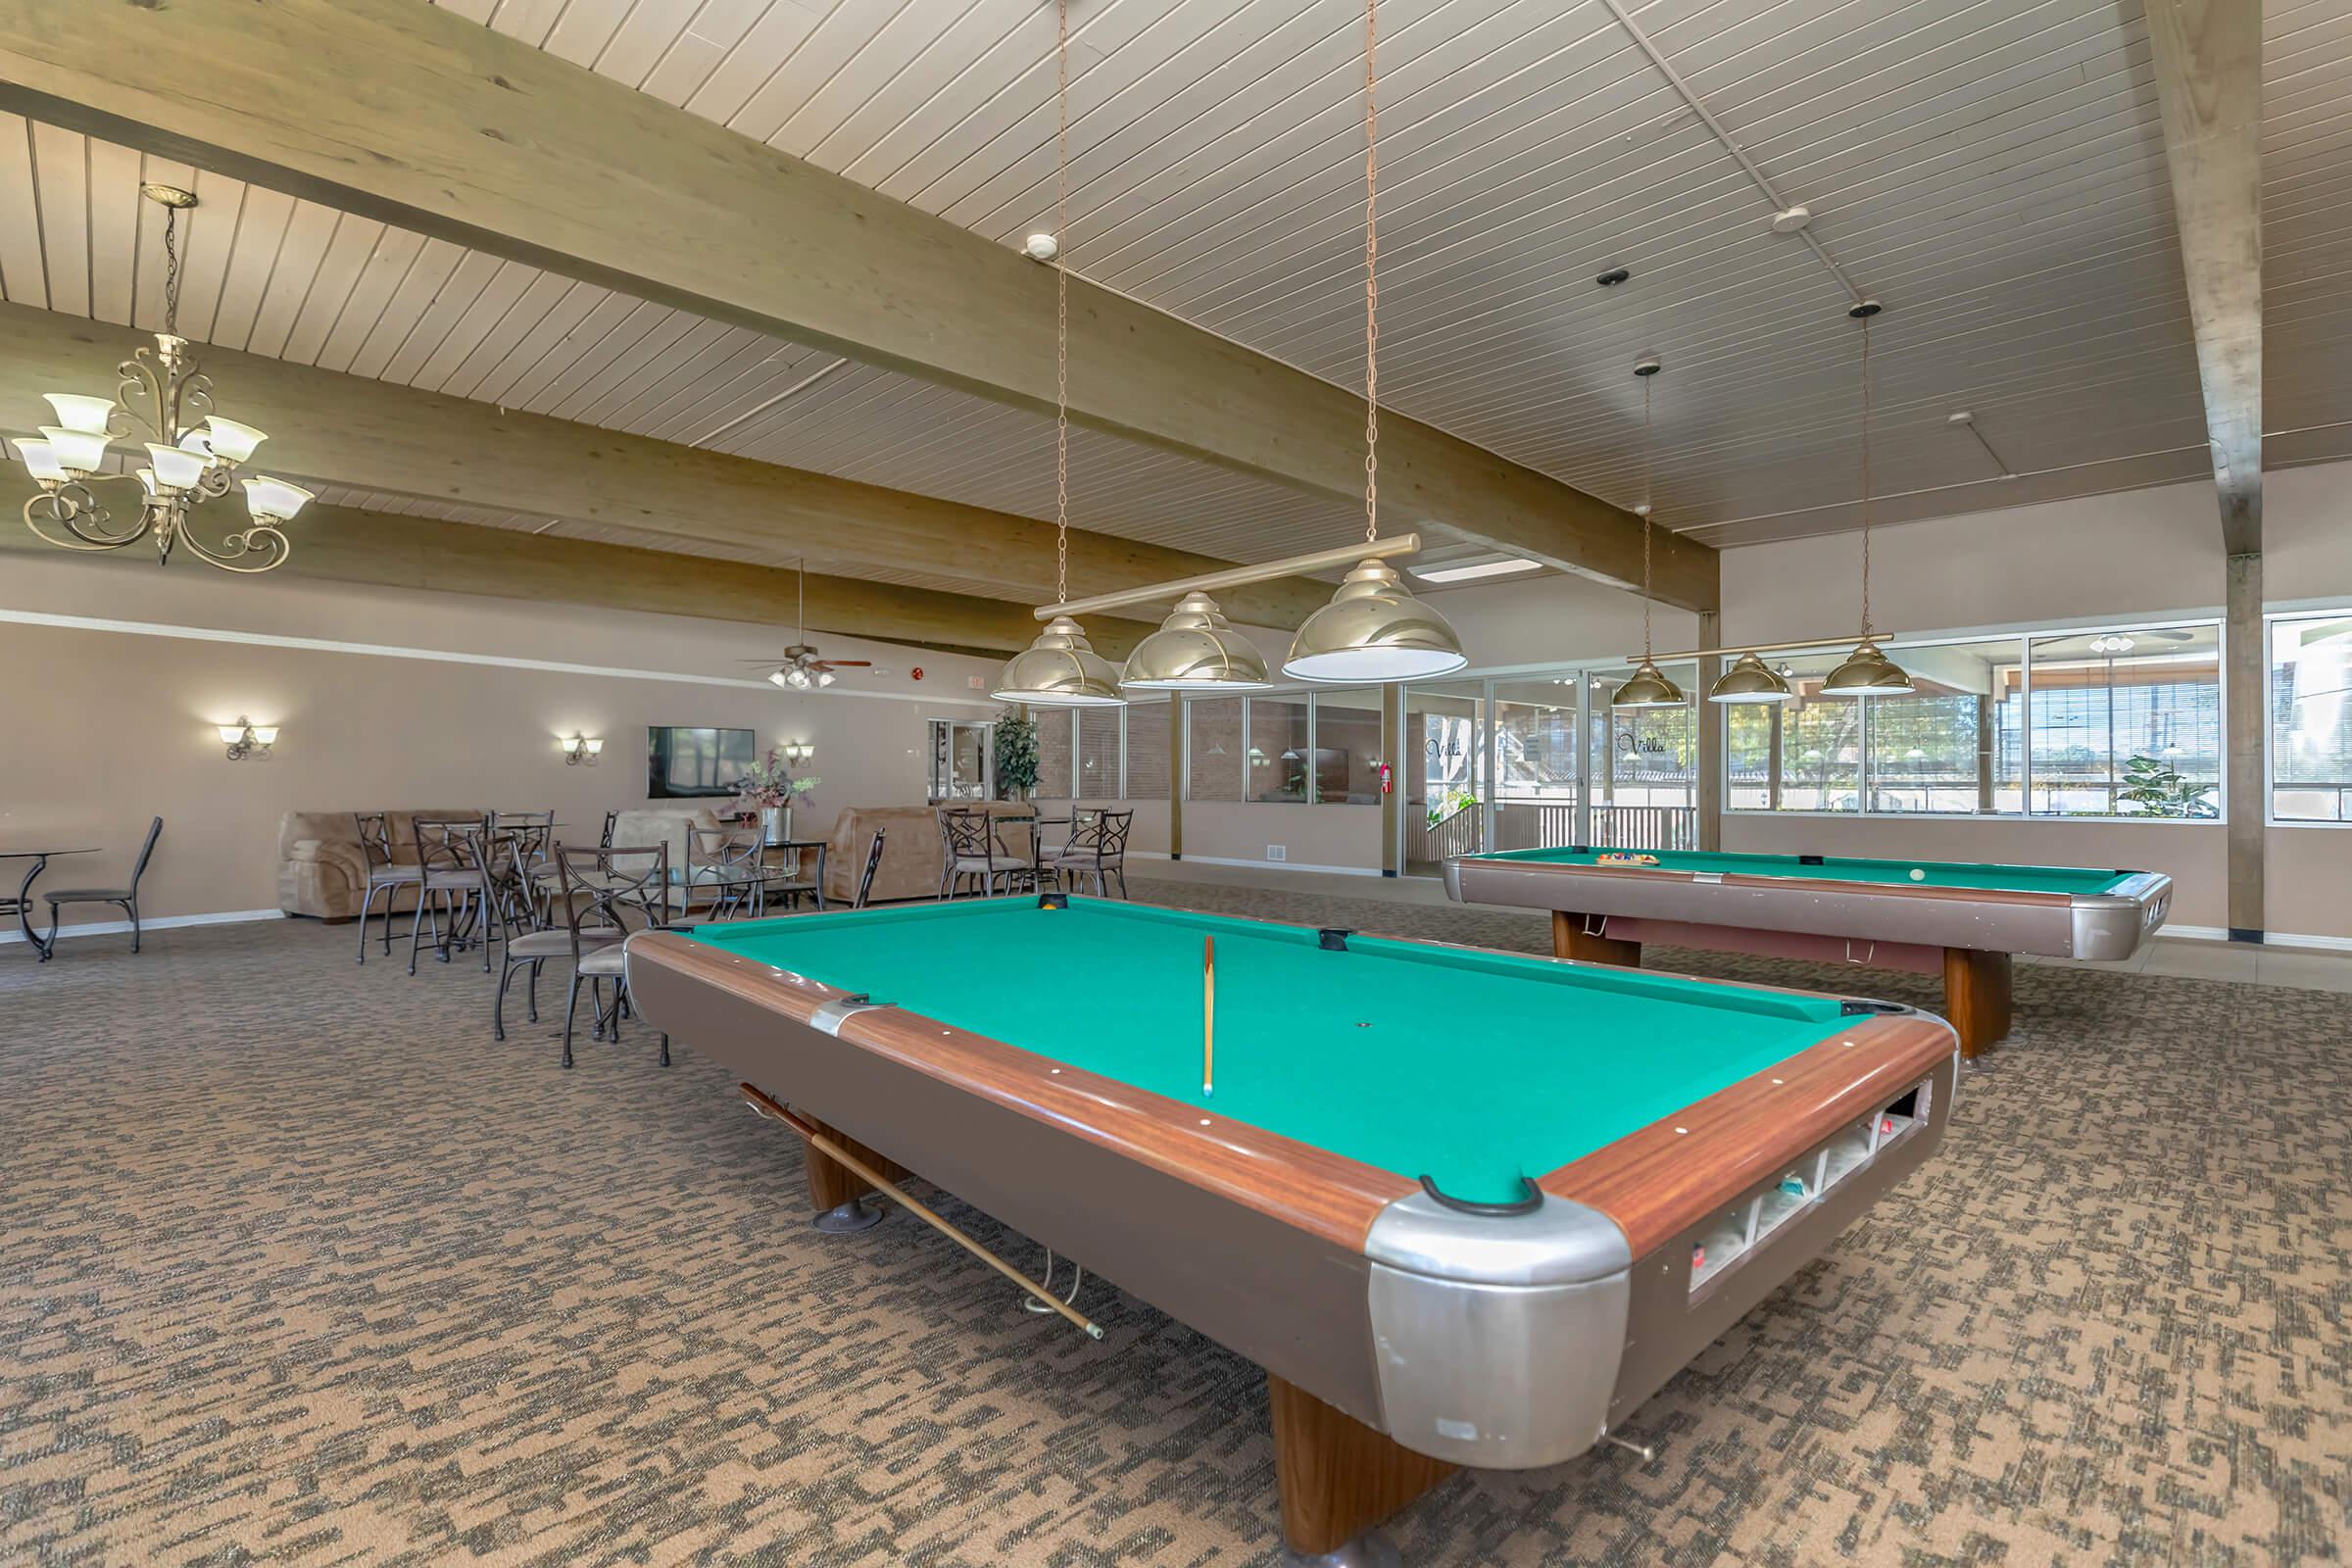 pool tables in the community room